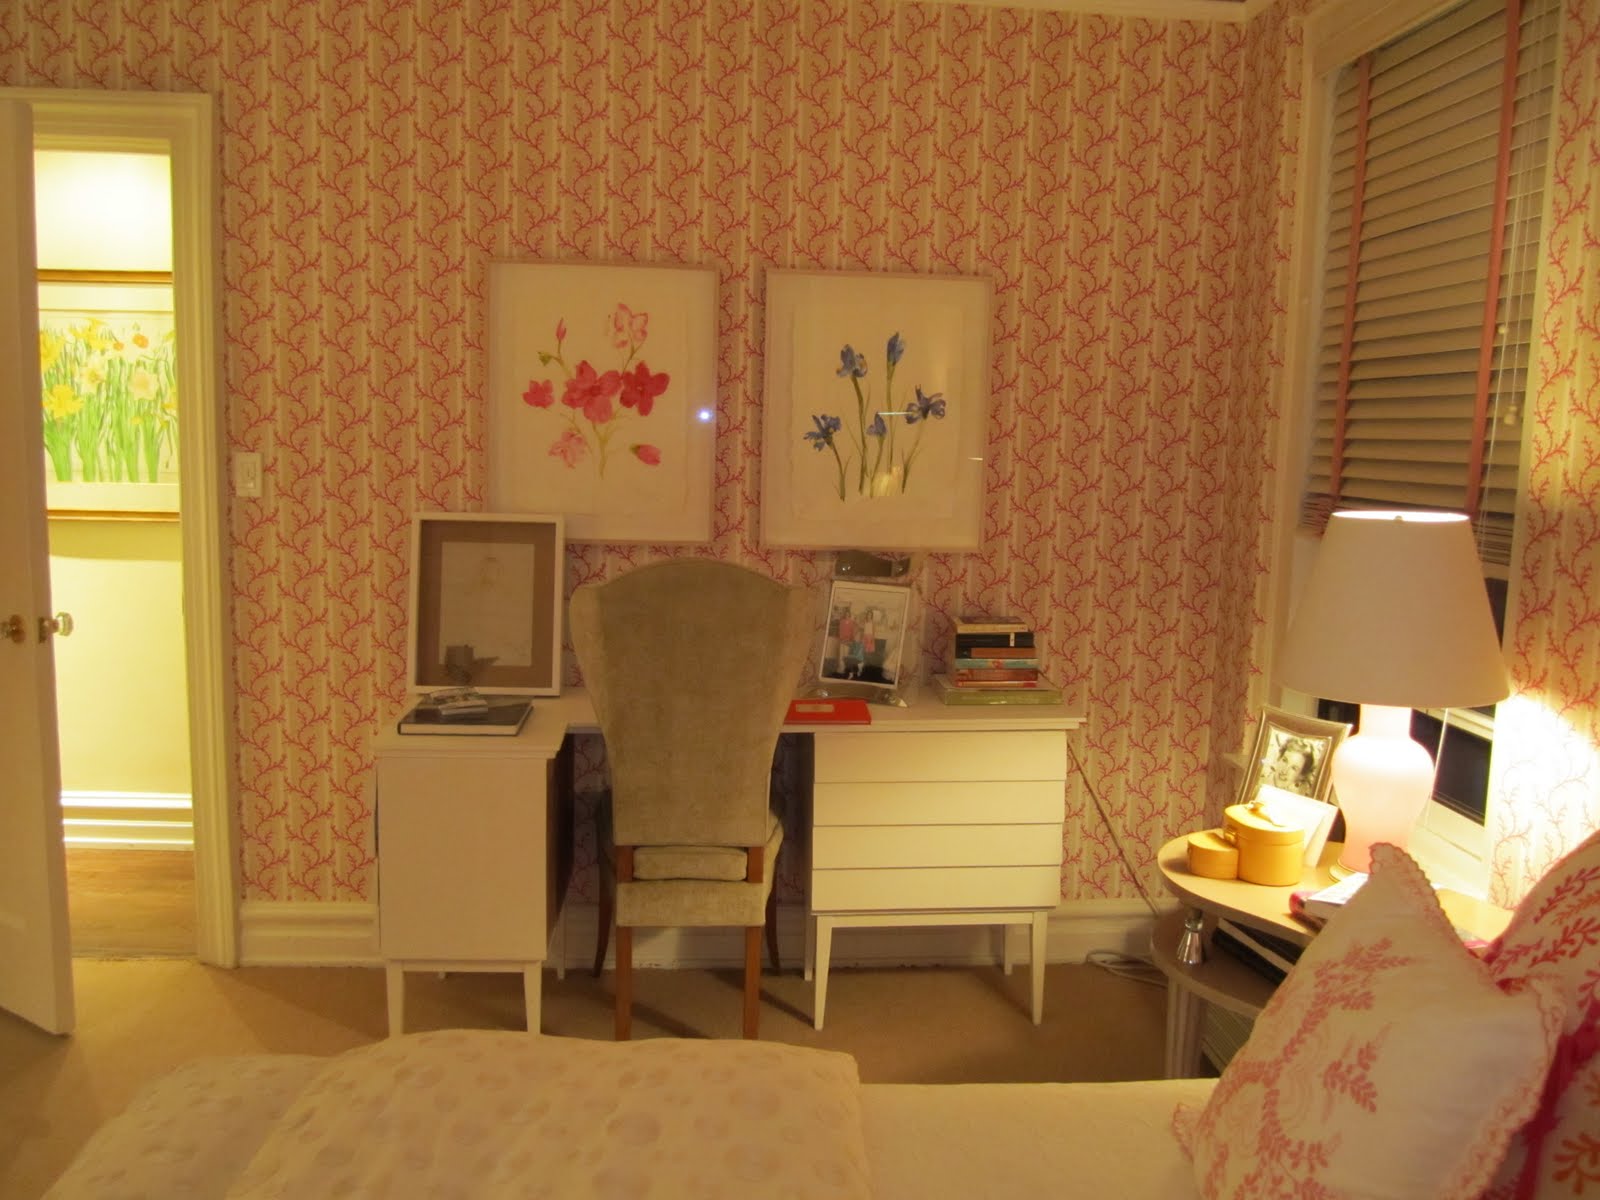 Free Download Her Girly Pink And White Bedroom Where She Has